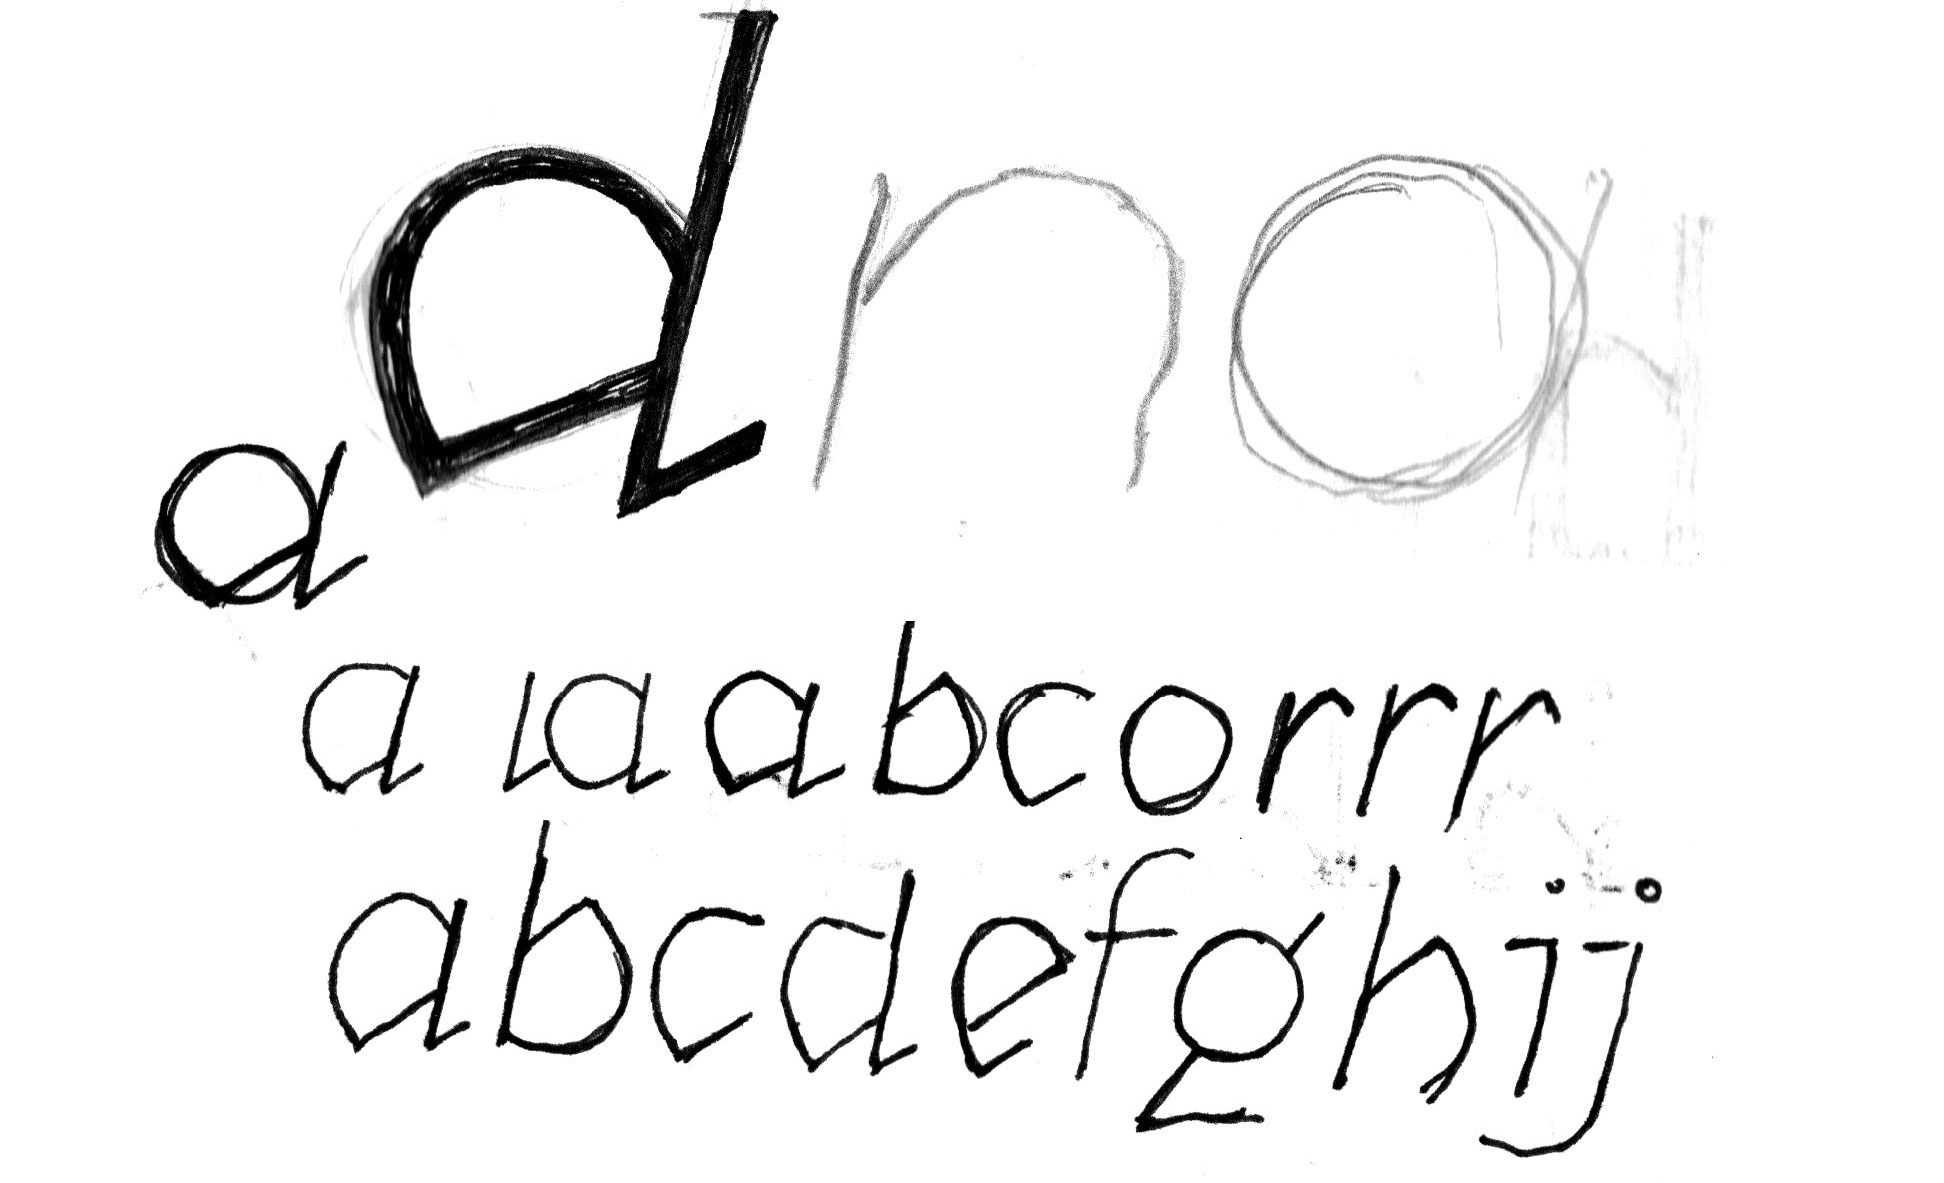 Manual sketches of letters